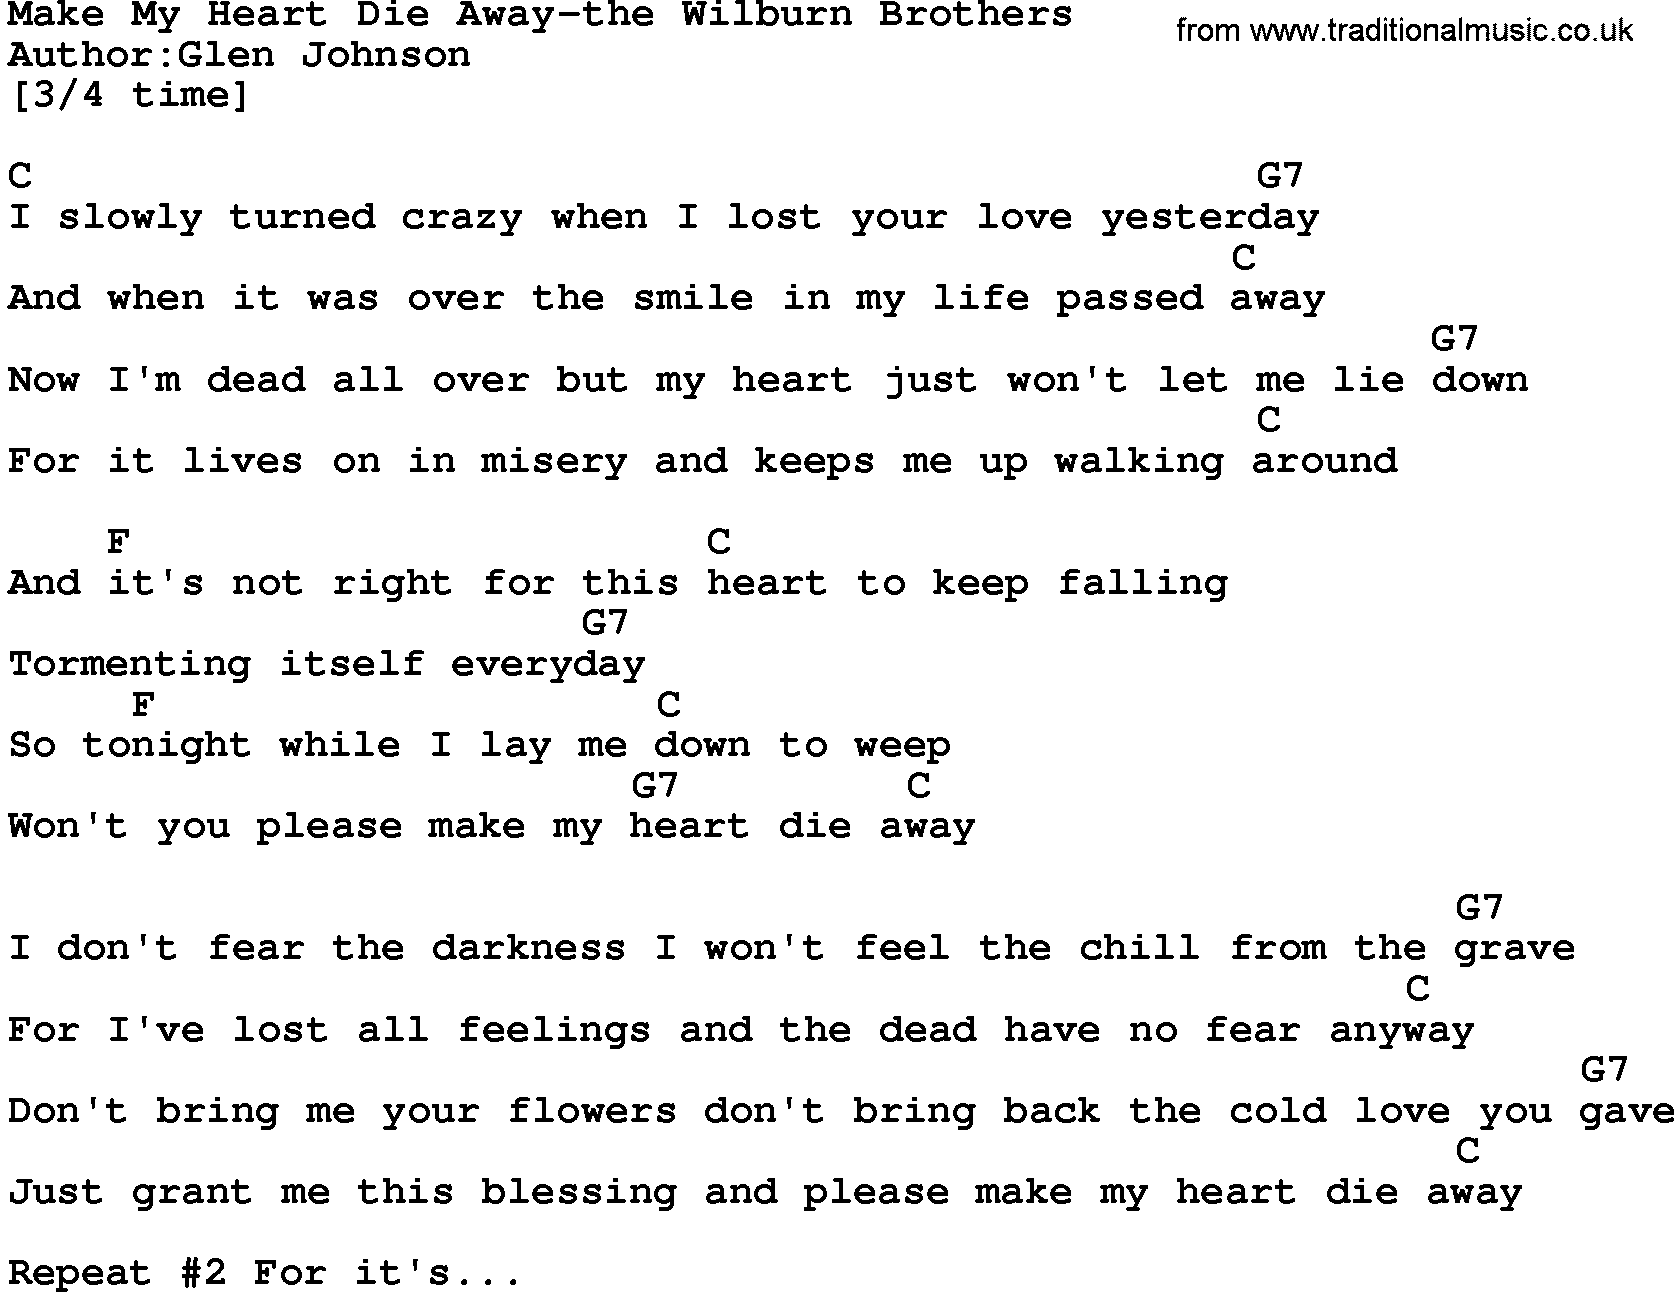 Country music song: Make My Heart Die Away-The Wilburn Brothers lyrics and chords